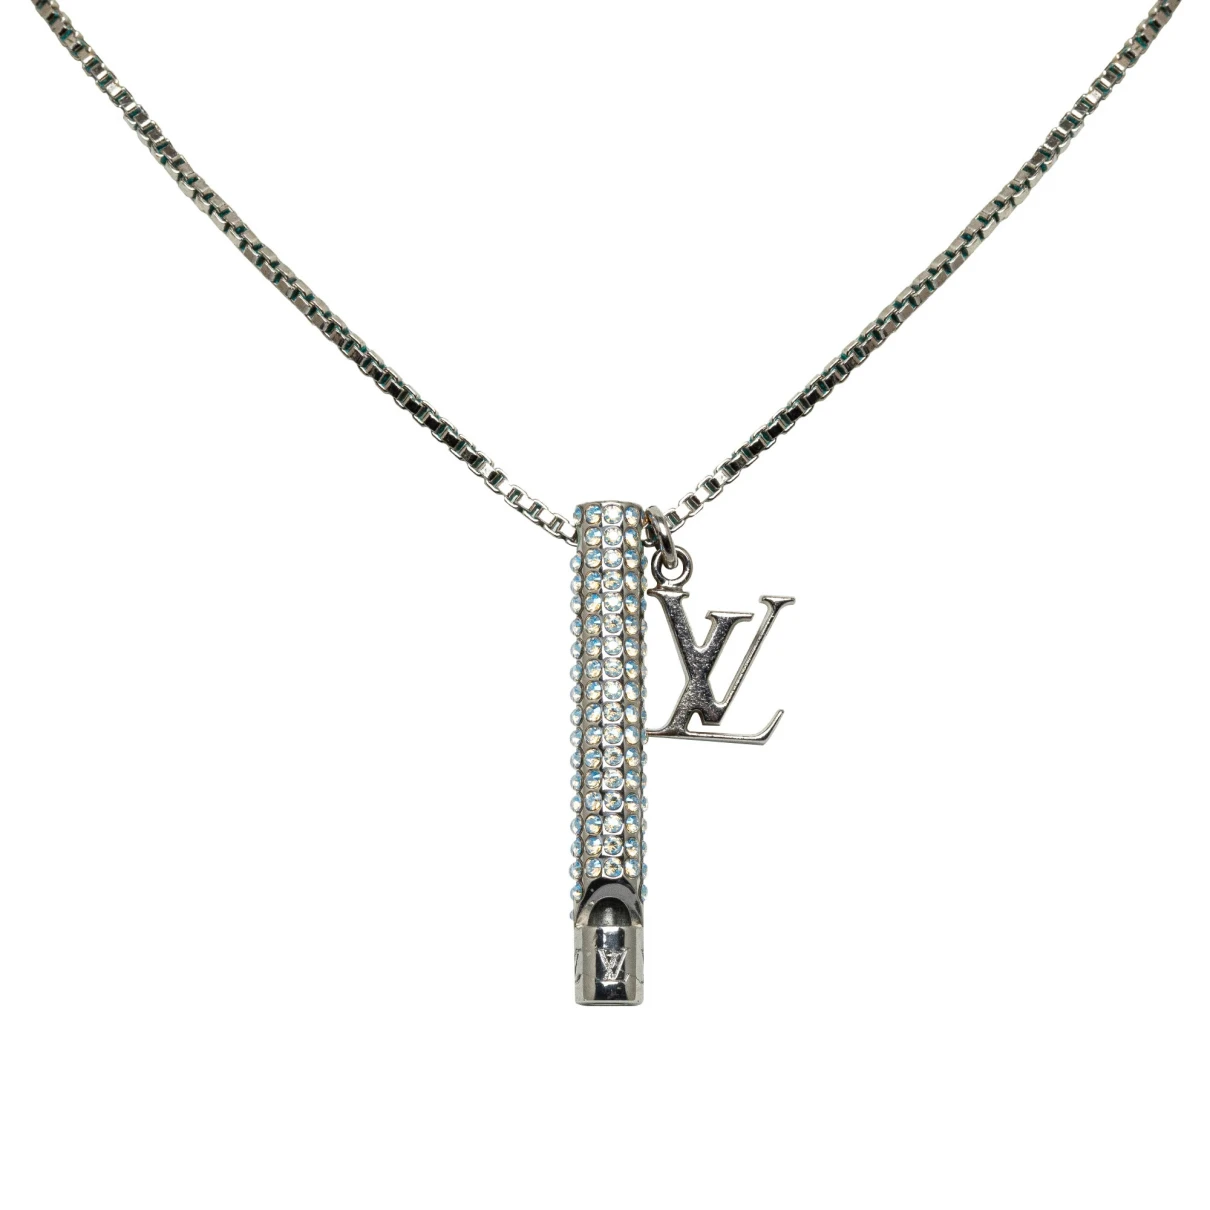 jewellery Louis Vuitton necklaces for Female Metal. Used condition